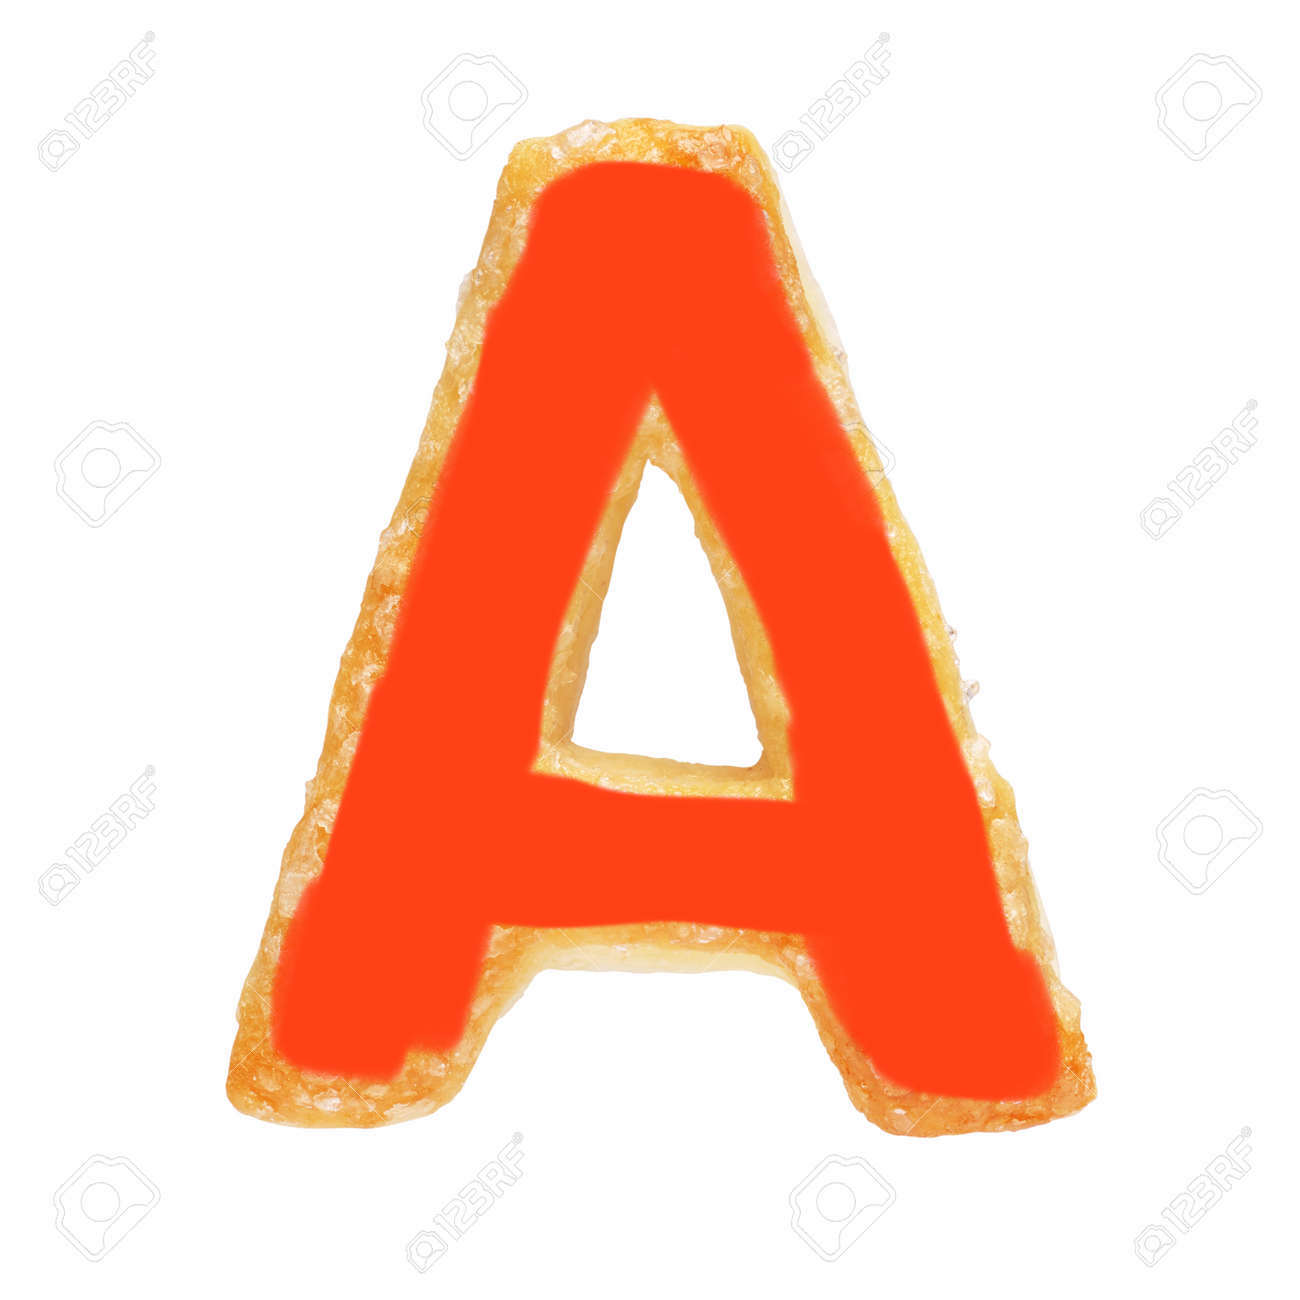  Letter A From Baked Dough oder Cookie